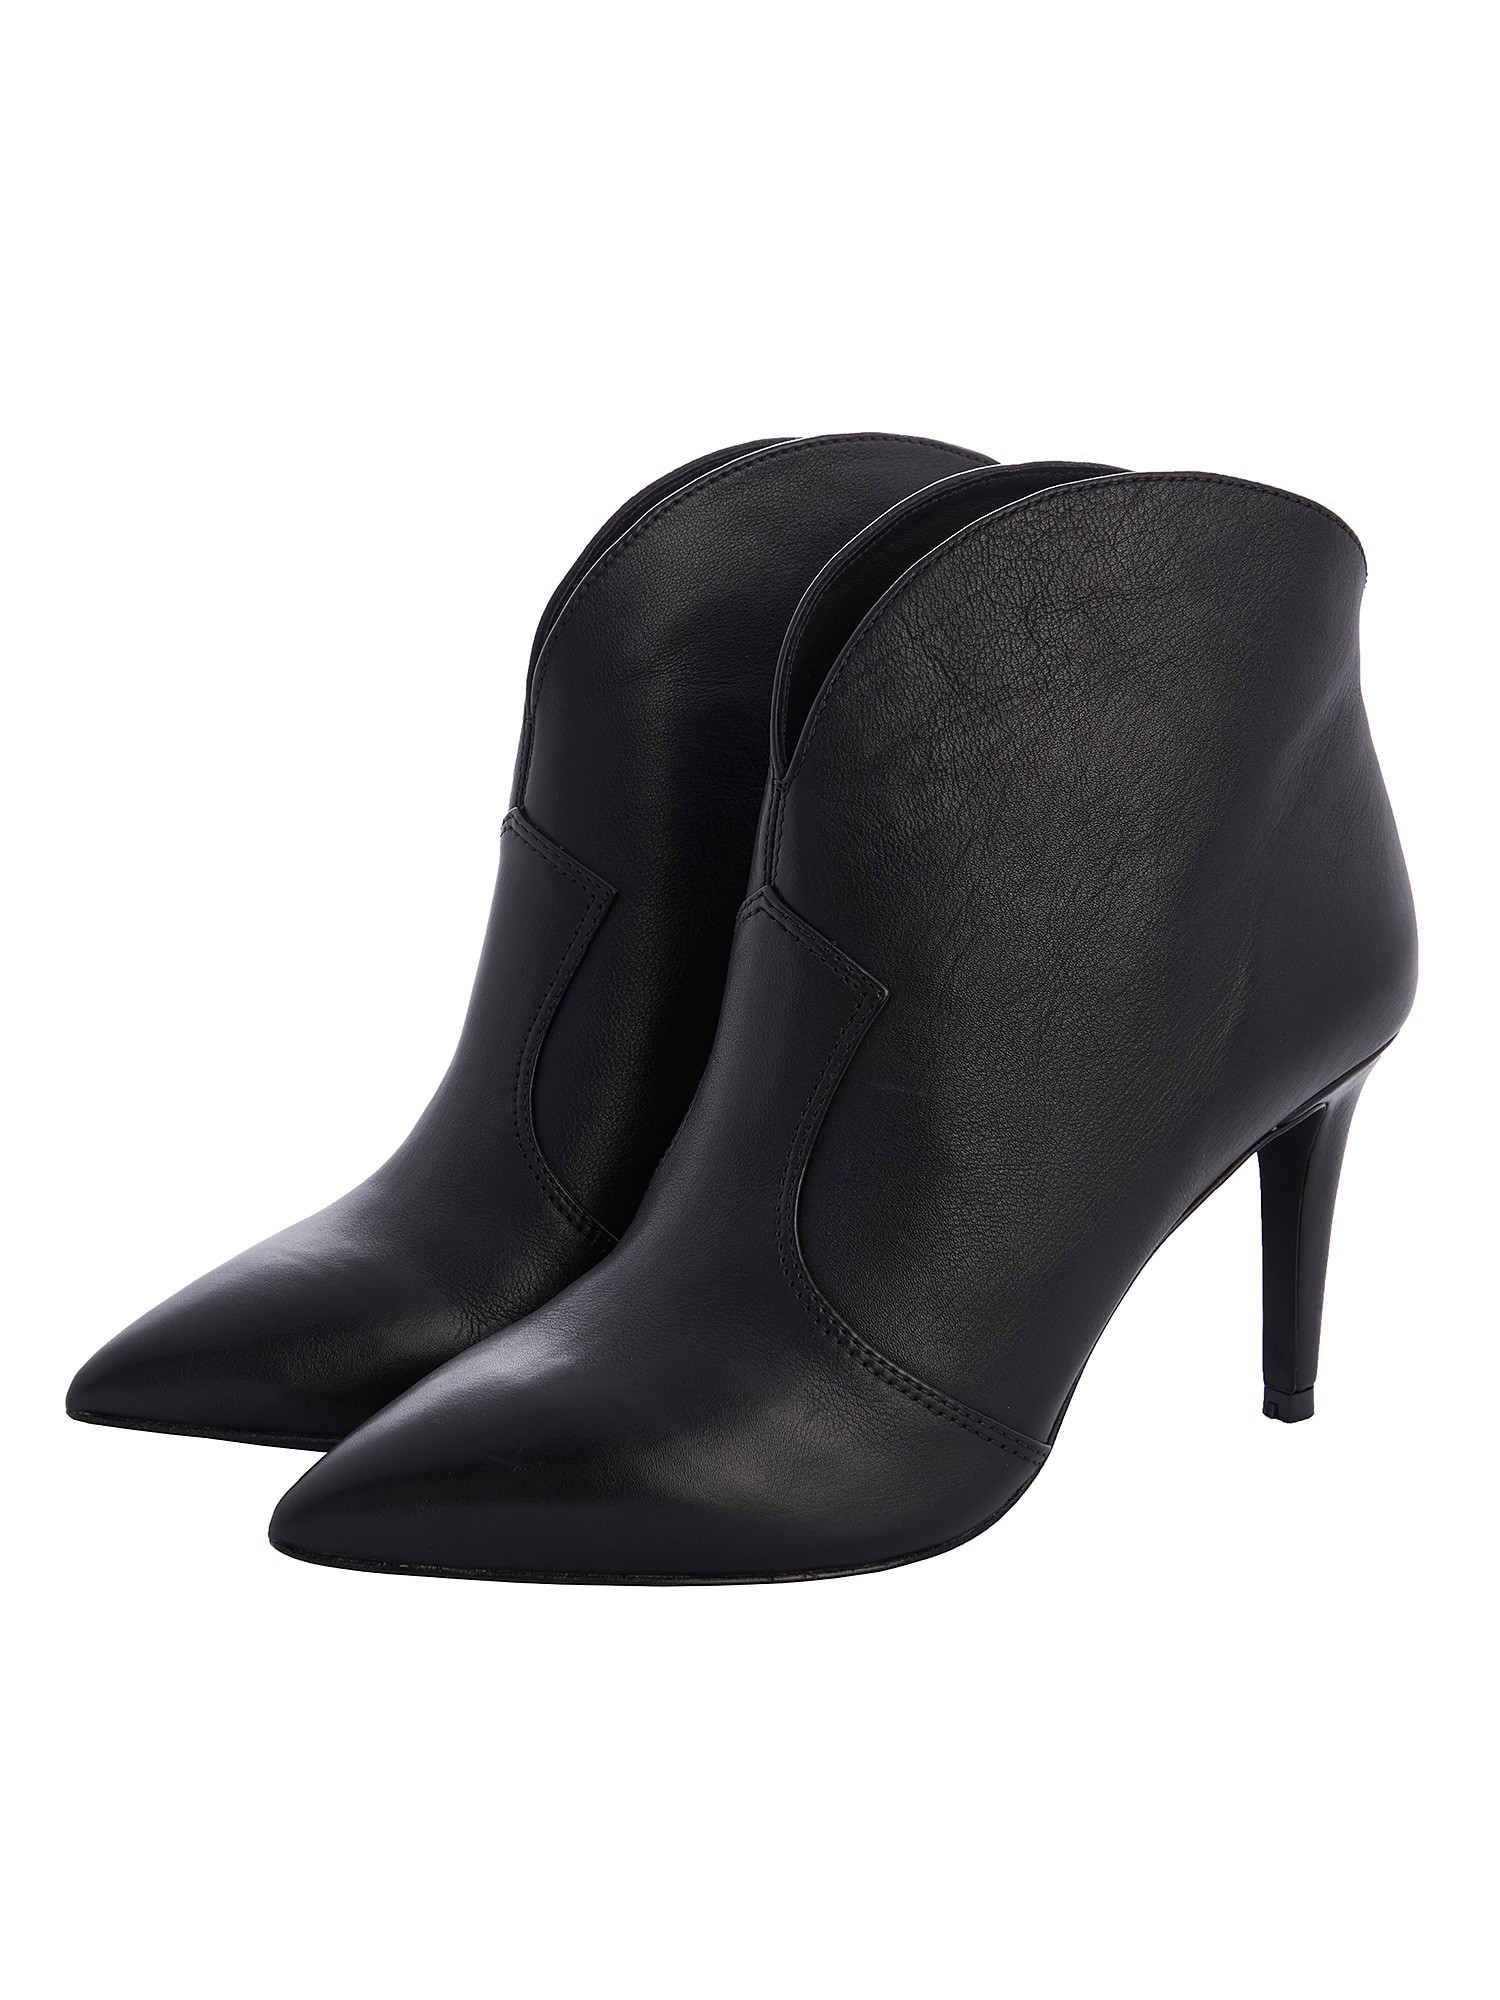 Ankle boots woman black leather stiletto heel ASH